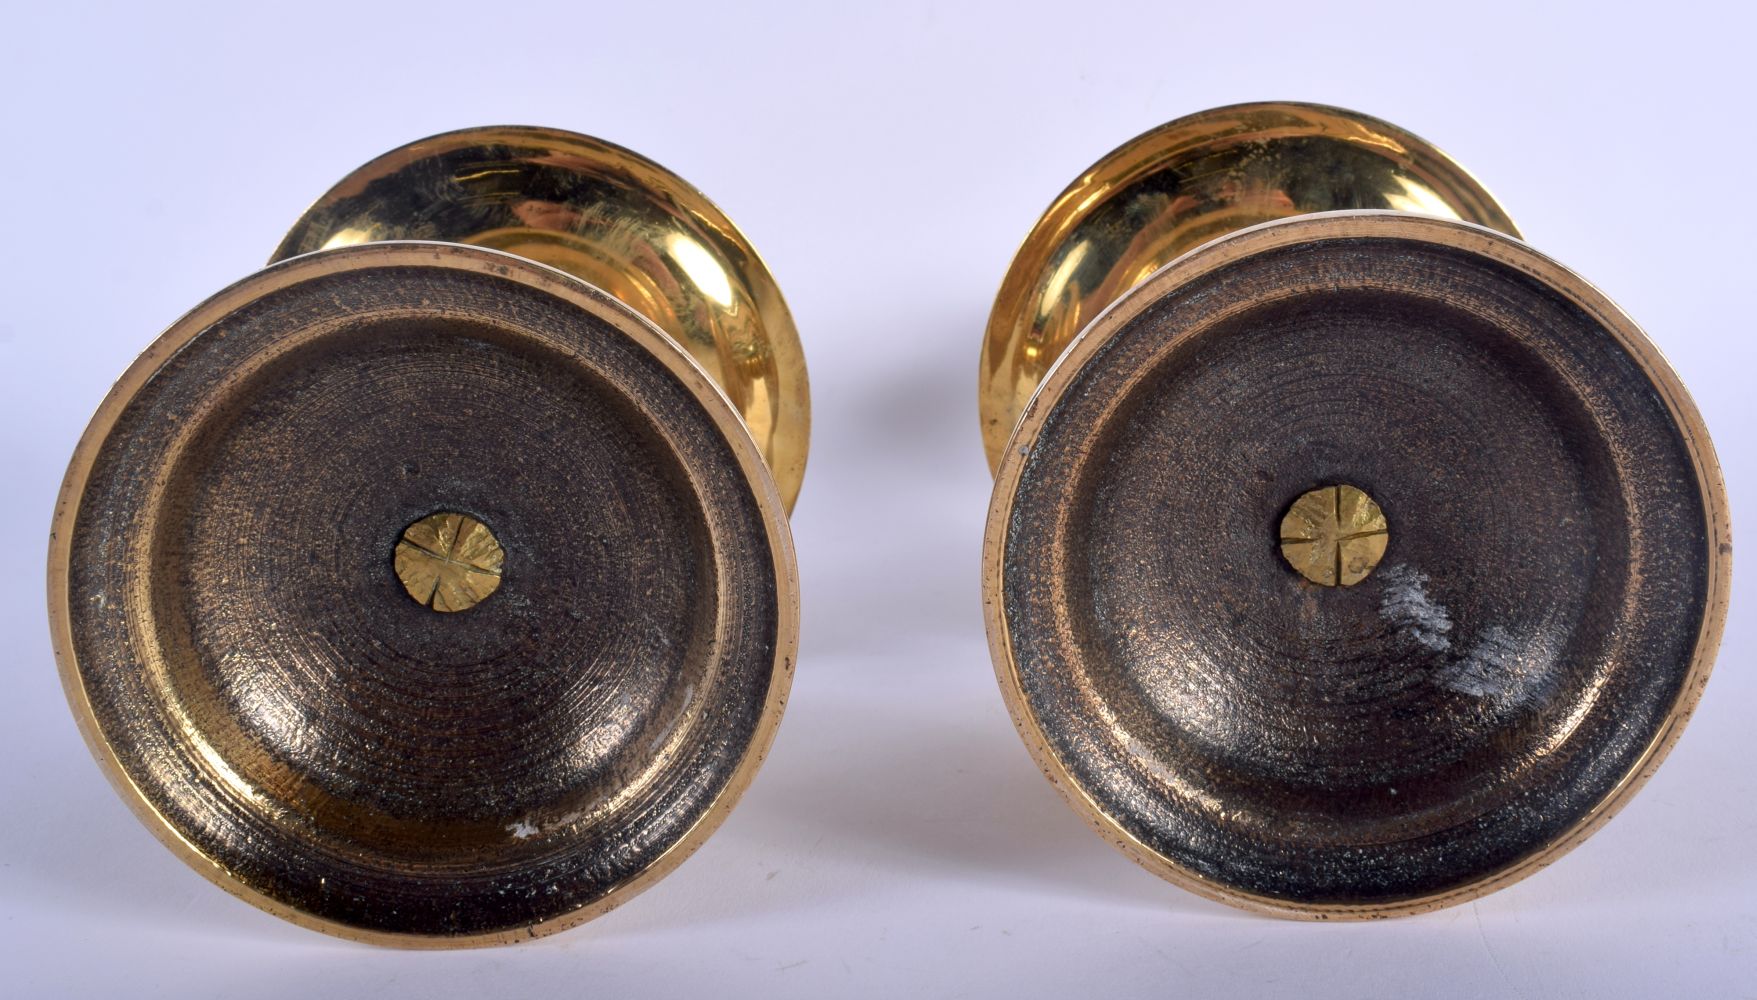 A PAIR OF 18TH CENTURY EUROPEAN BRASS CANDLESTICKS with circular drip trays. 23 cm high. - Image 3 of 3